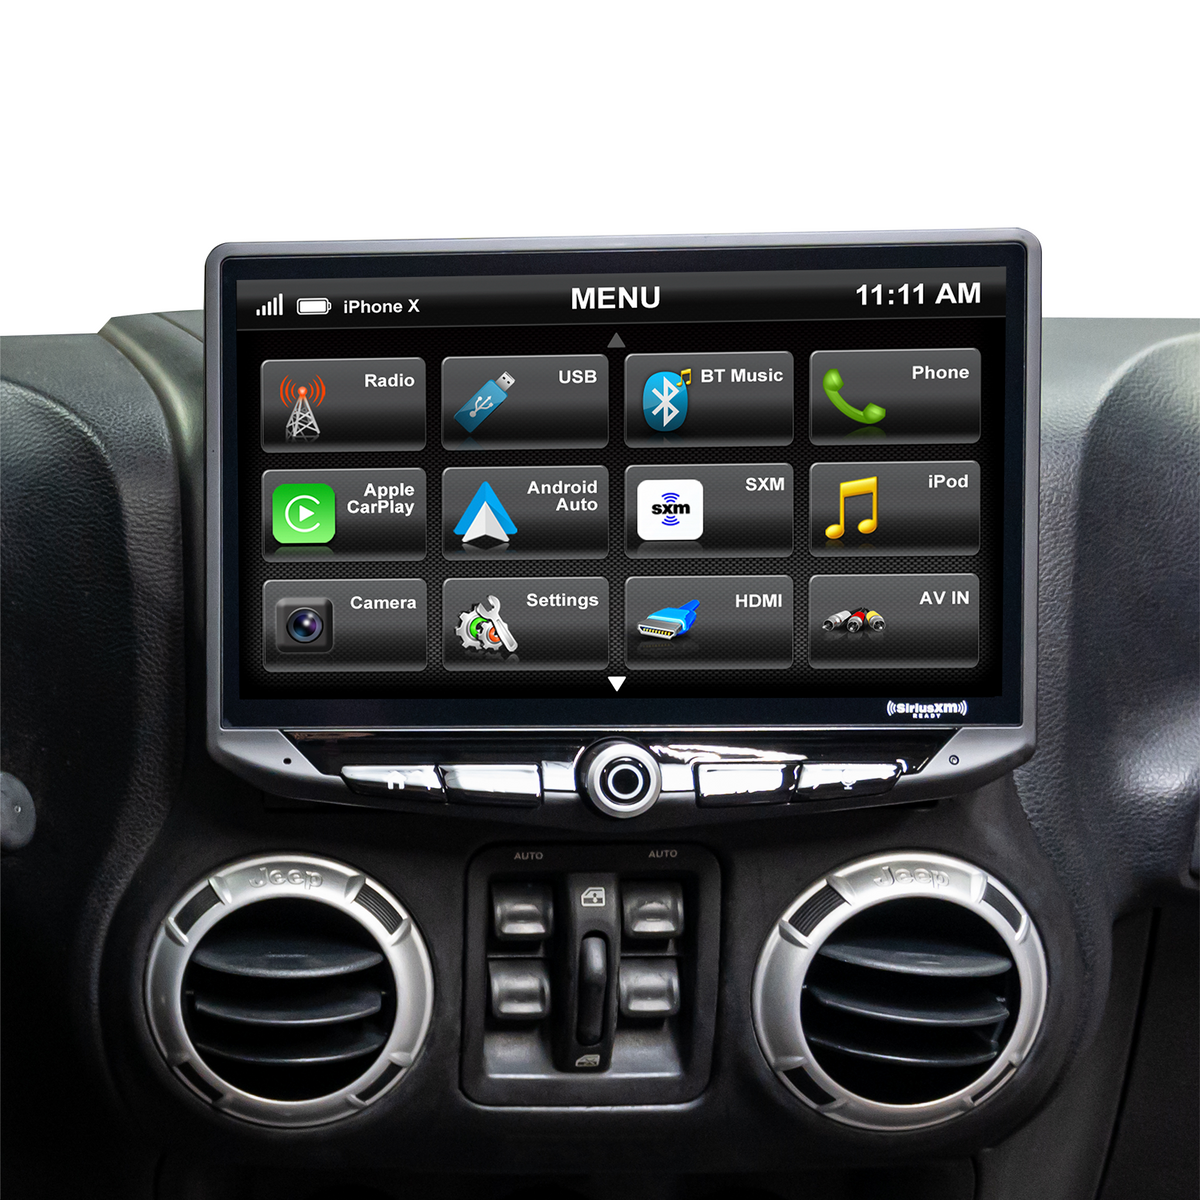 Jeep Wrangler JK Stereo Replacement System: 10-Inch Touchscreen Radio